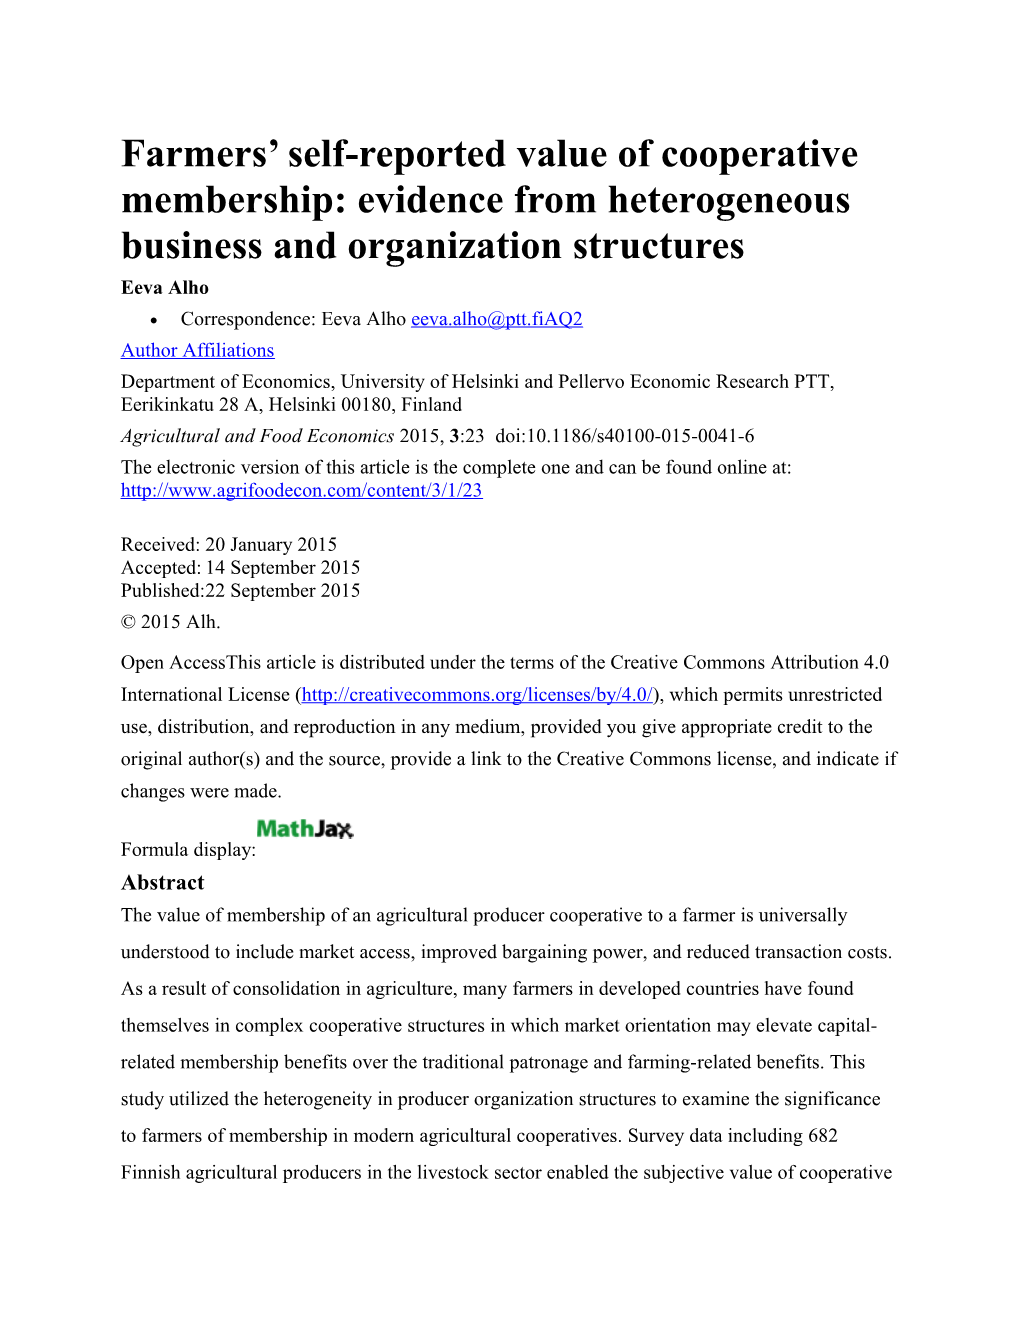 Farmers Self-Reported Value of Cooperative Membership: Evidence from Heterogeneous Business